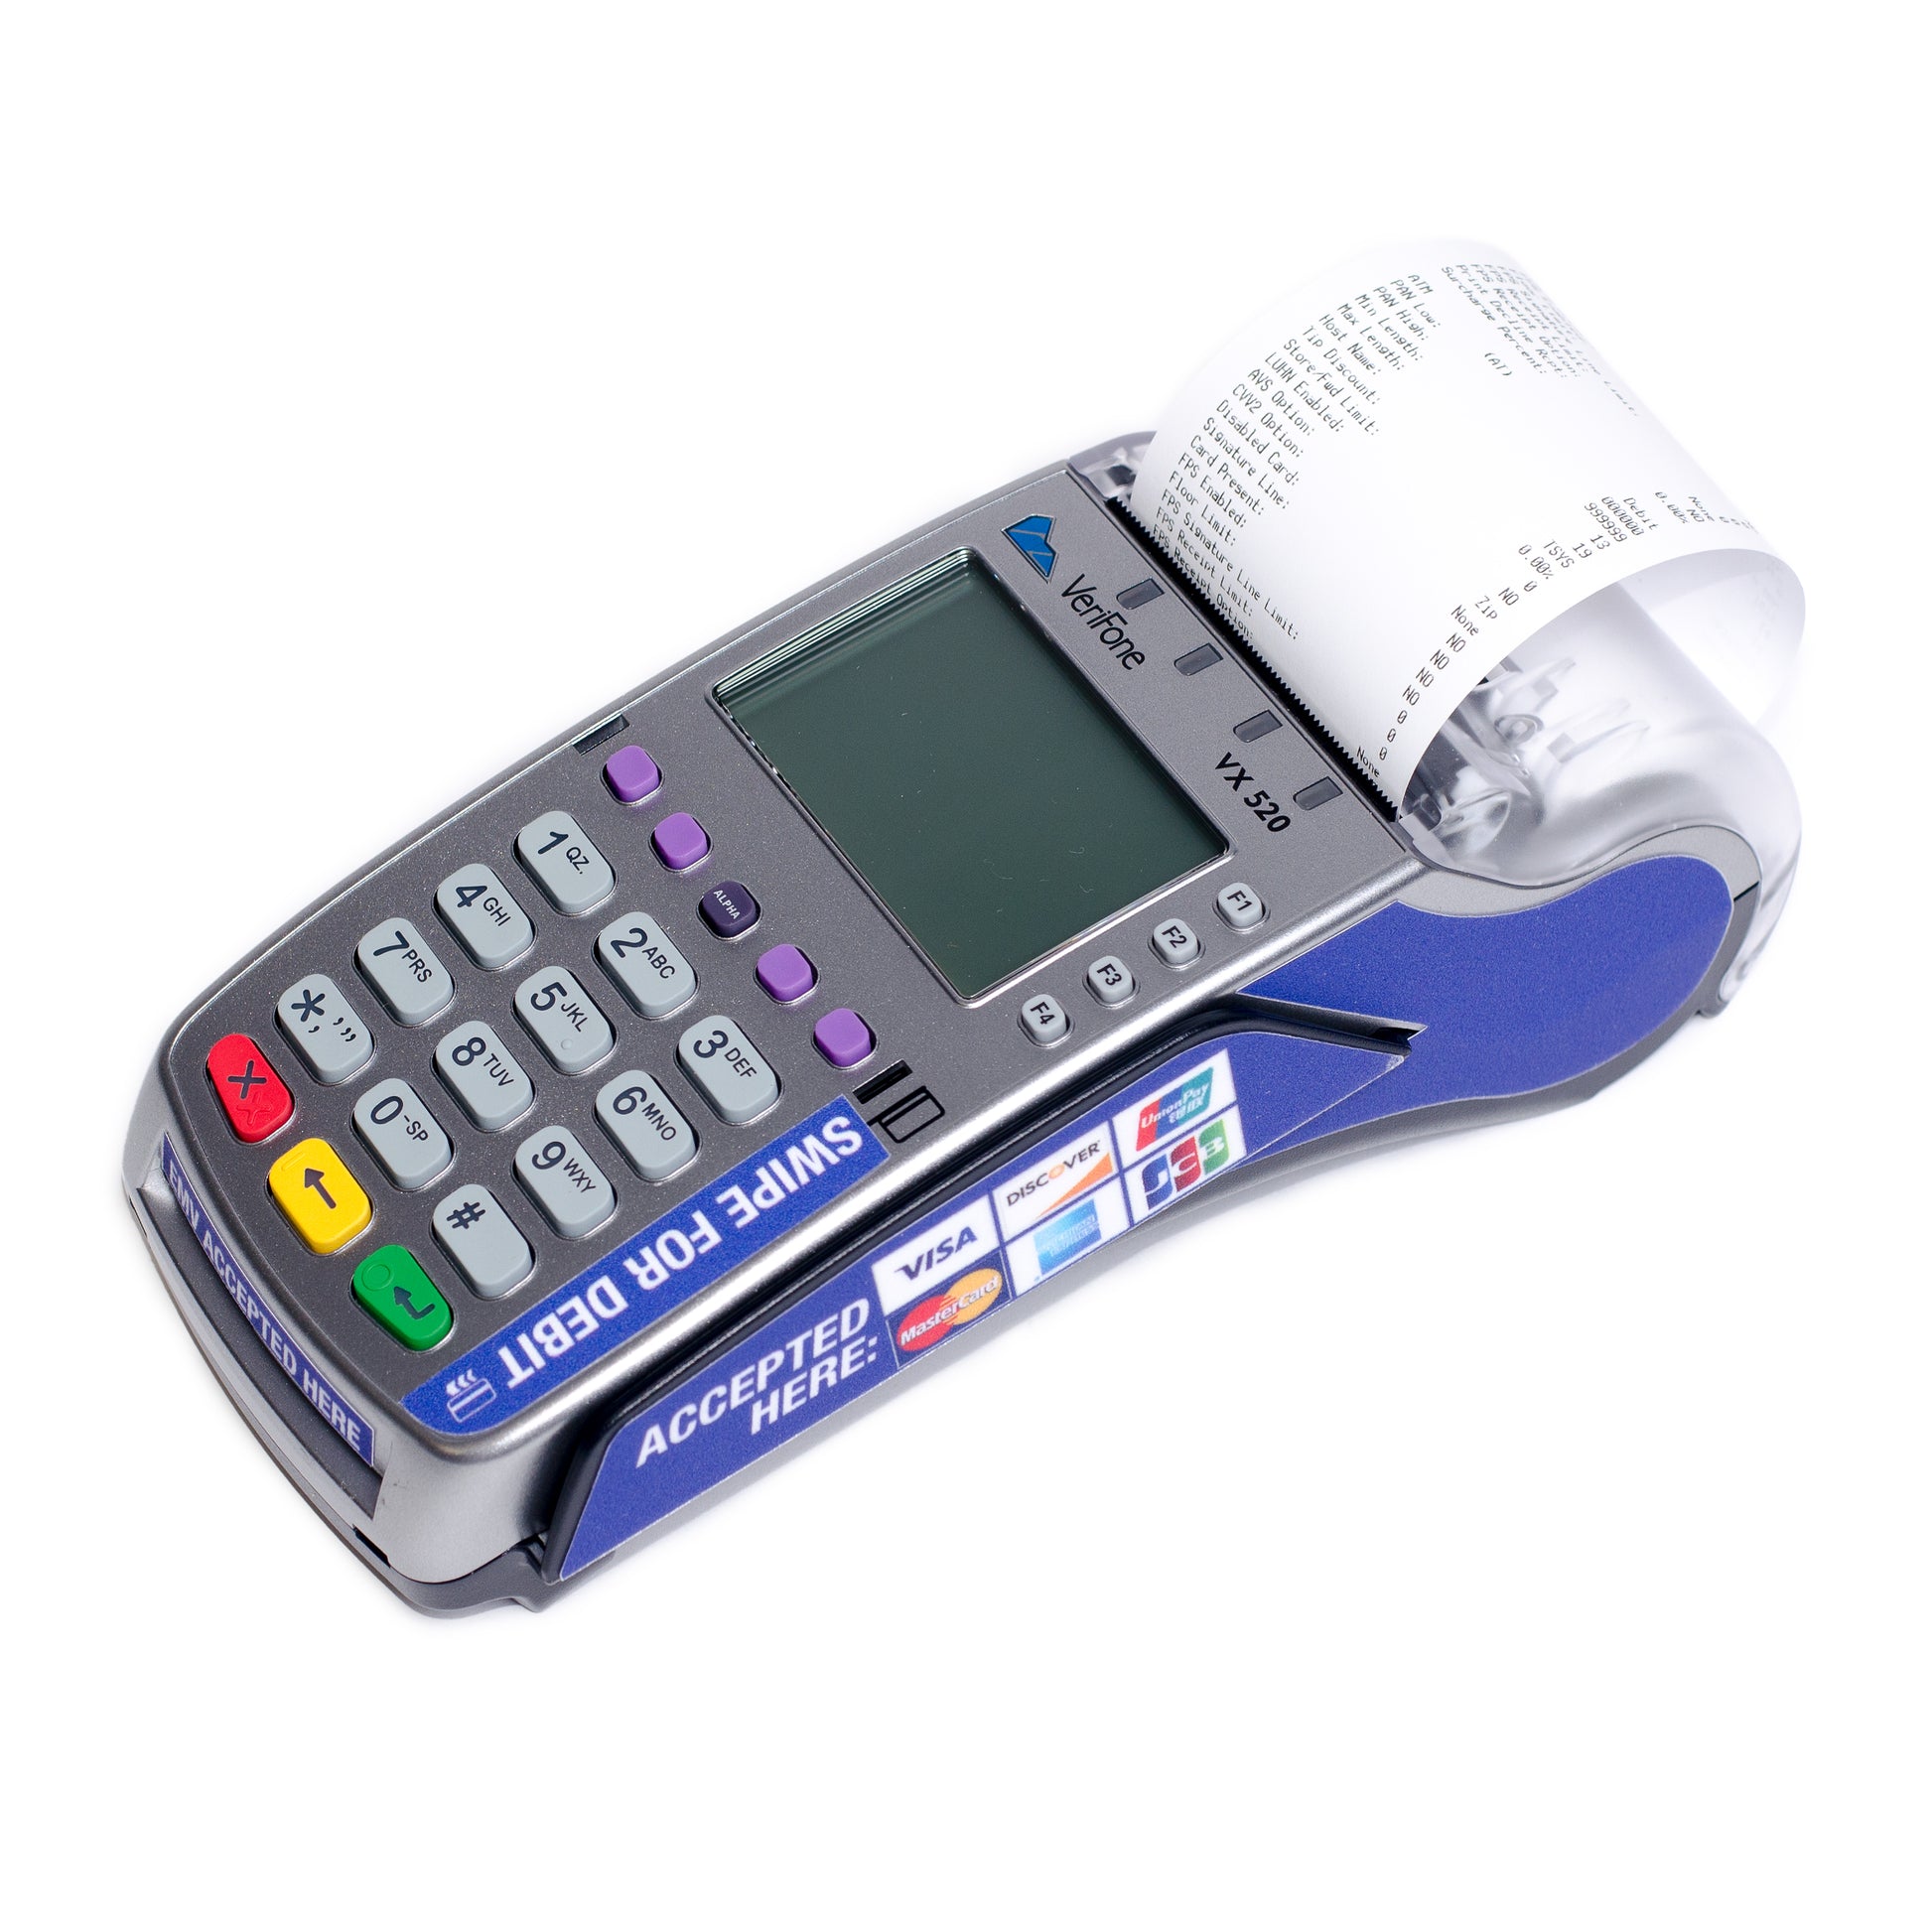 Verifone VX520 Point of Sale Terminal Wrap Rendering 3.